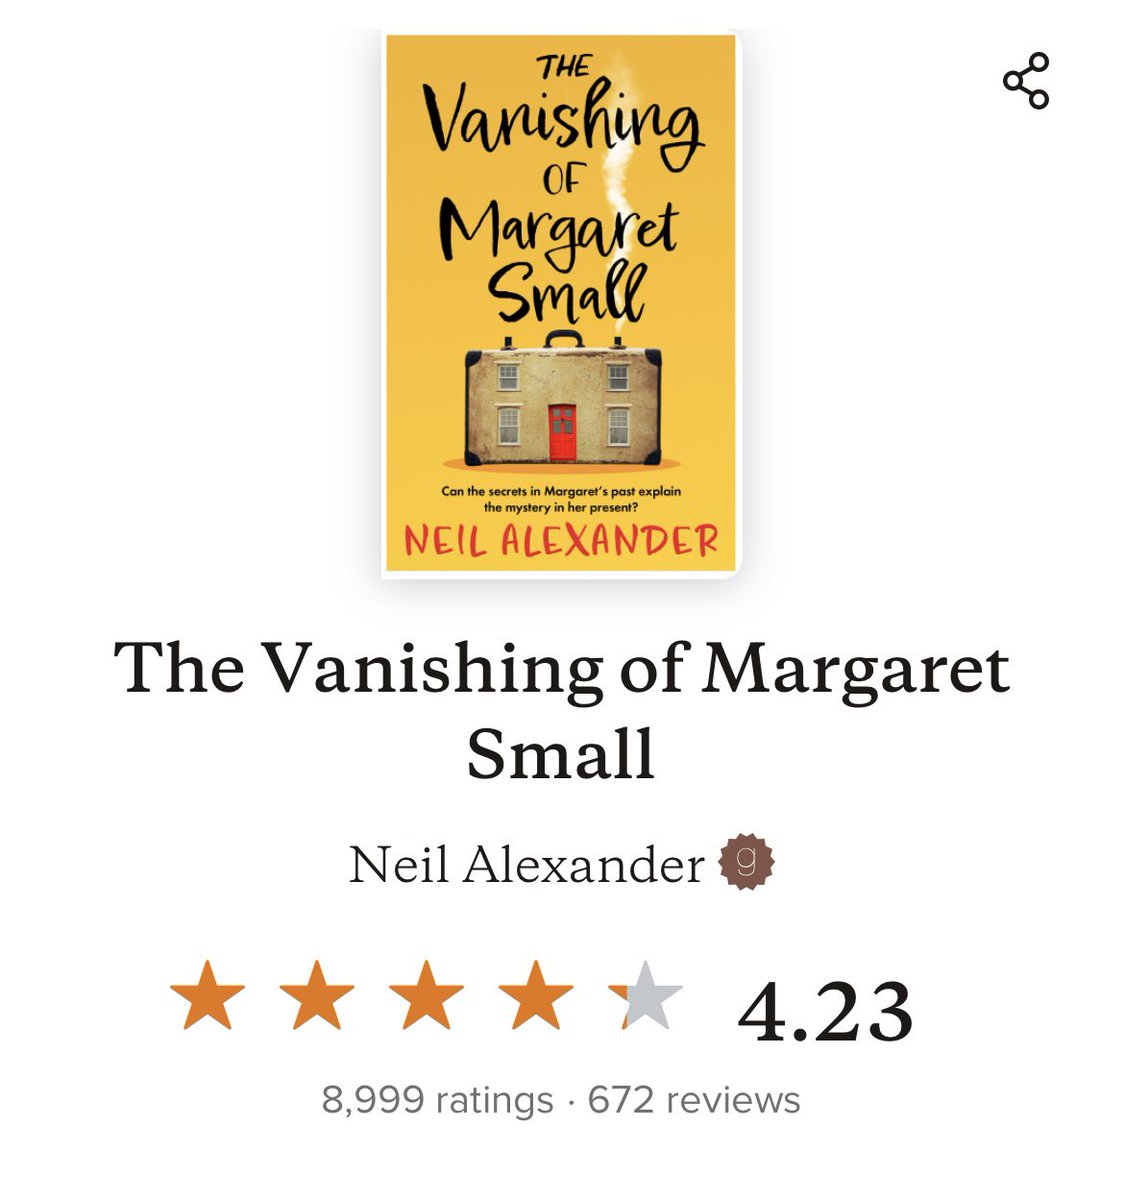 To those unpublished writers querying agents, or on submission (I know, it’s hell!), ‘The Vanishing of Margaret Small’ was rejected by over 50 UK editors before she got a deal here. Trust the process. Learn from it. But most of all, believe in - and be kind to - yourself 💛